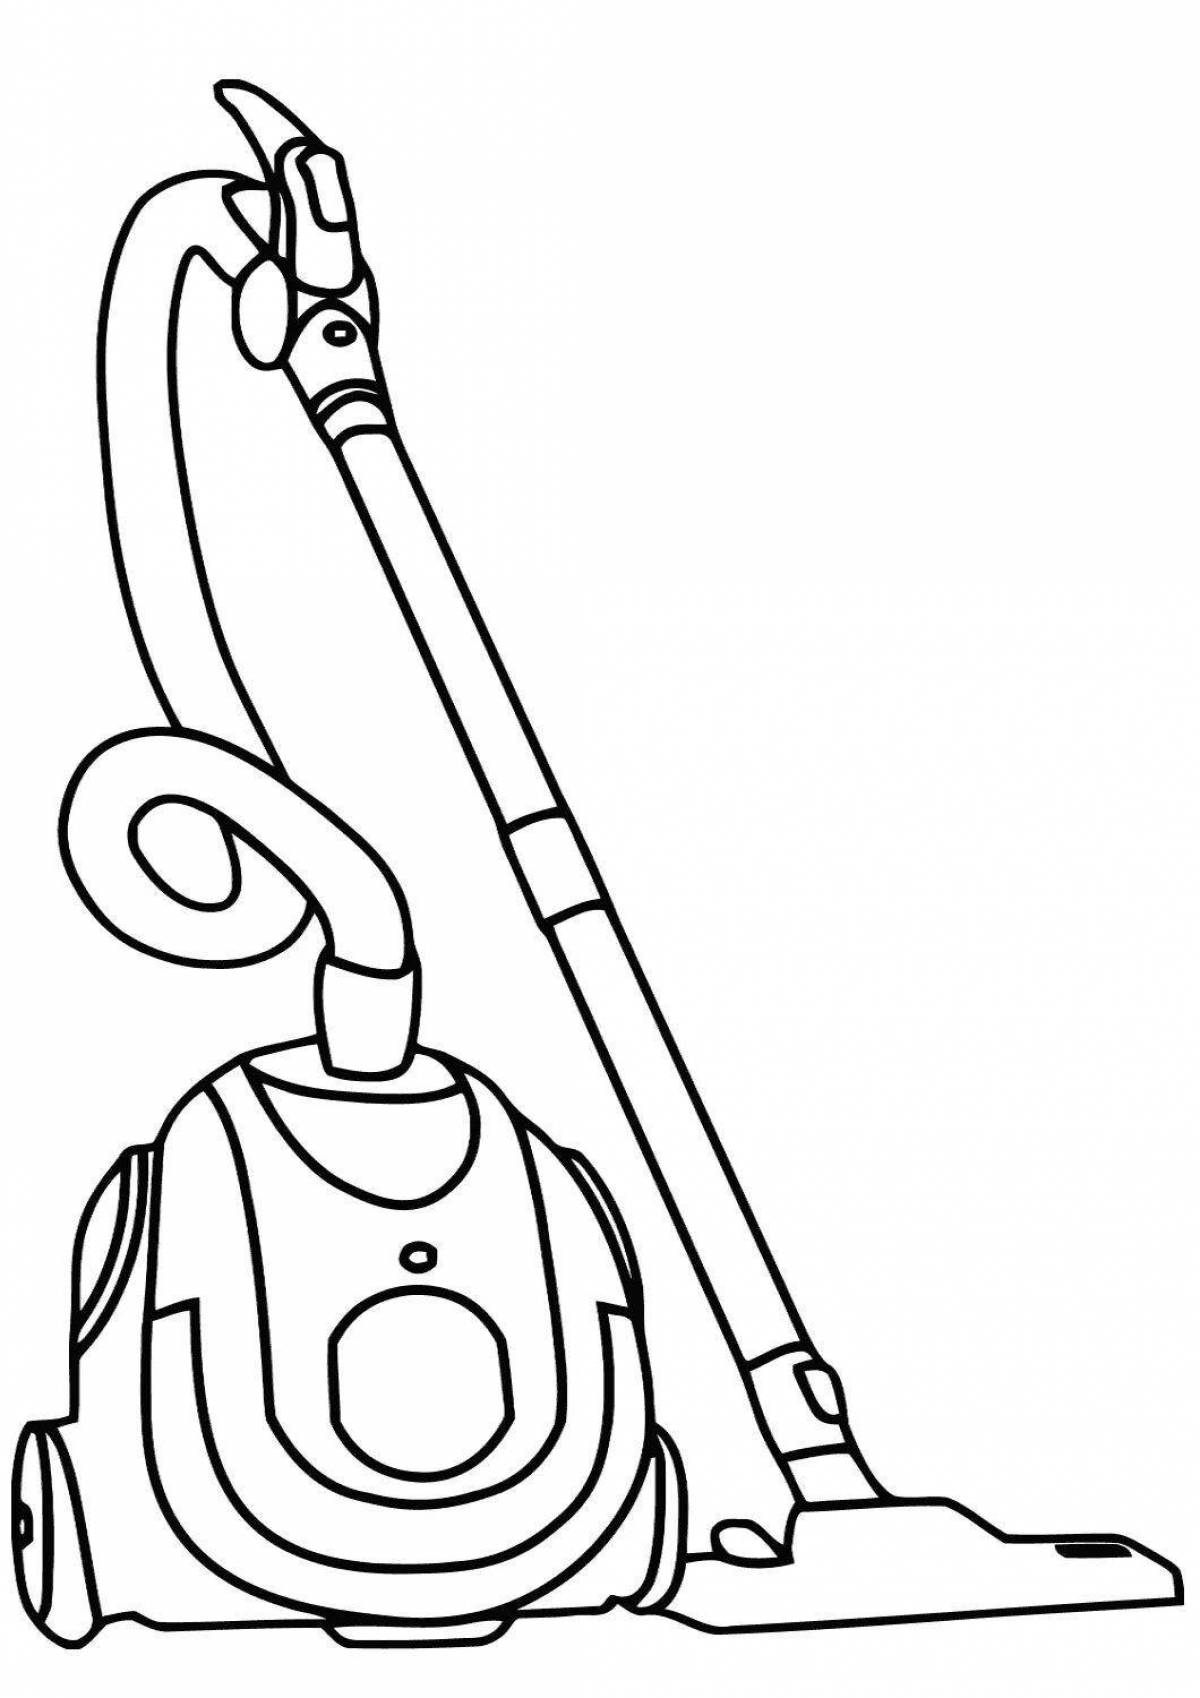 Cute robot vacuum cleaner coloring book for boys